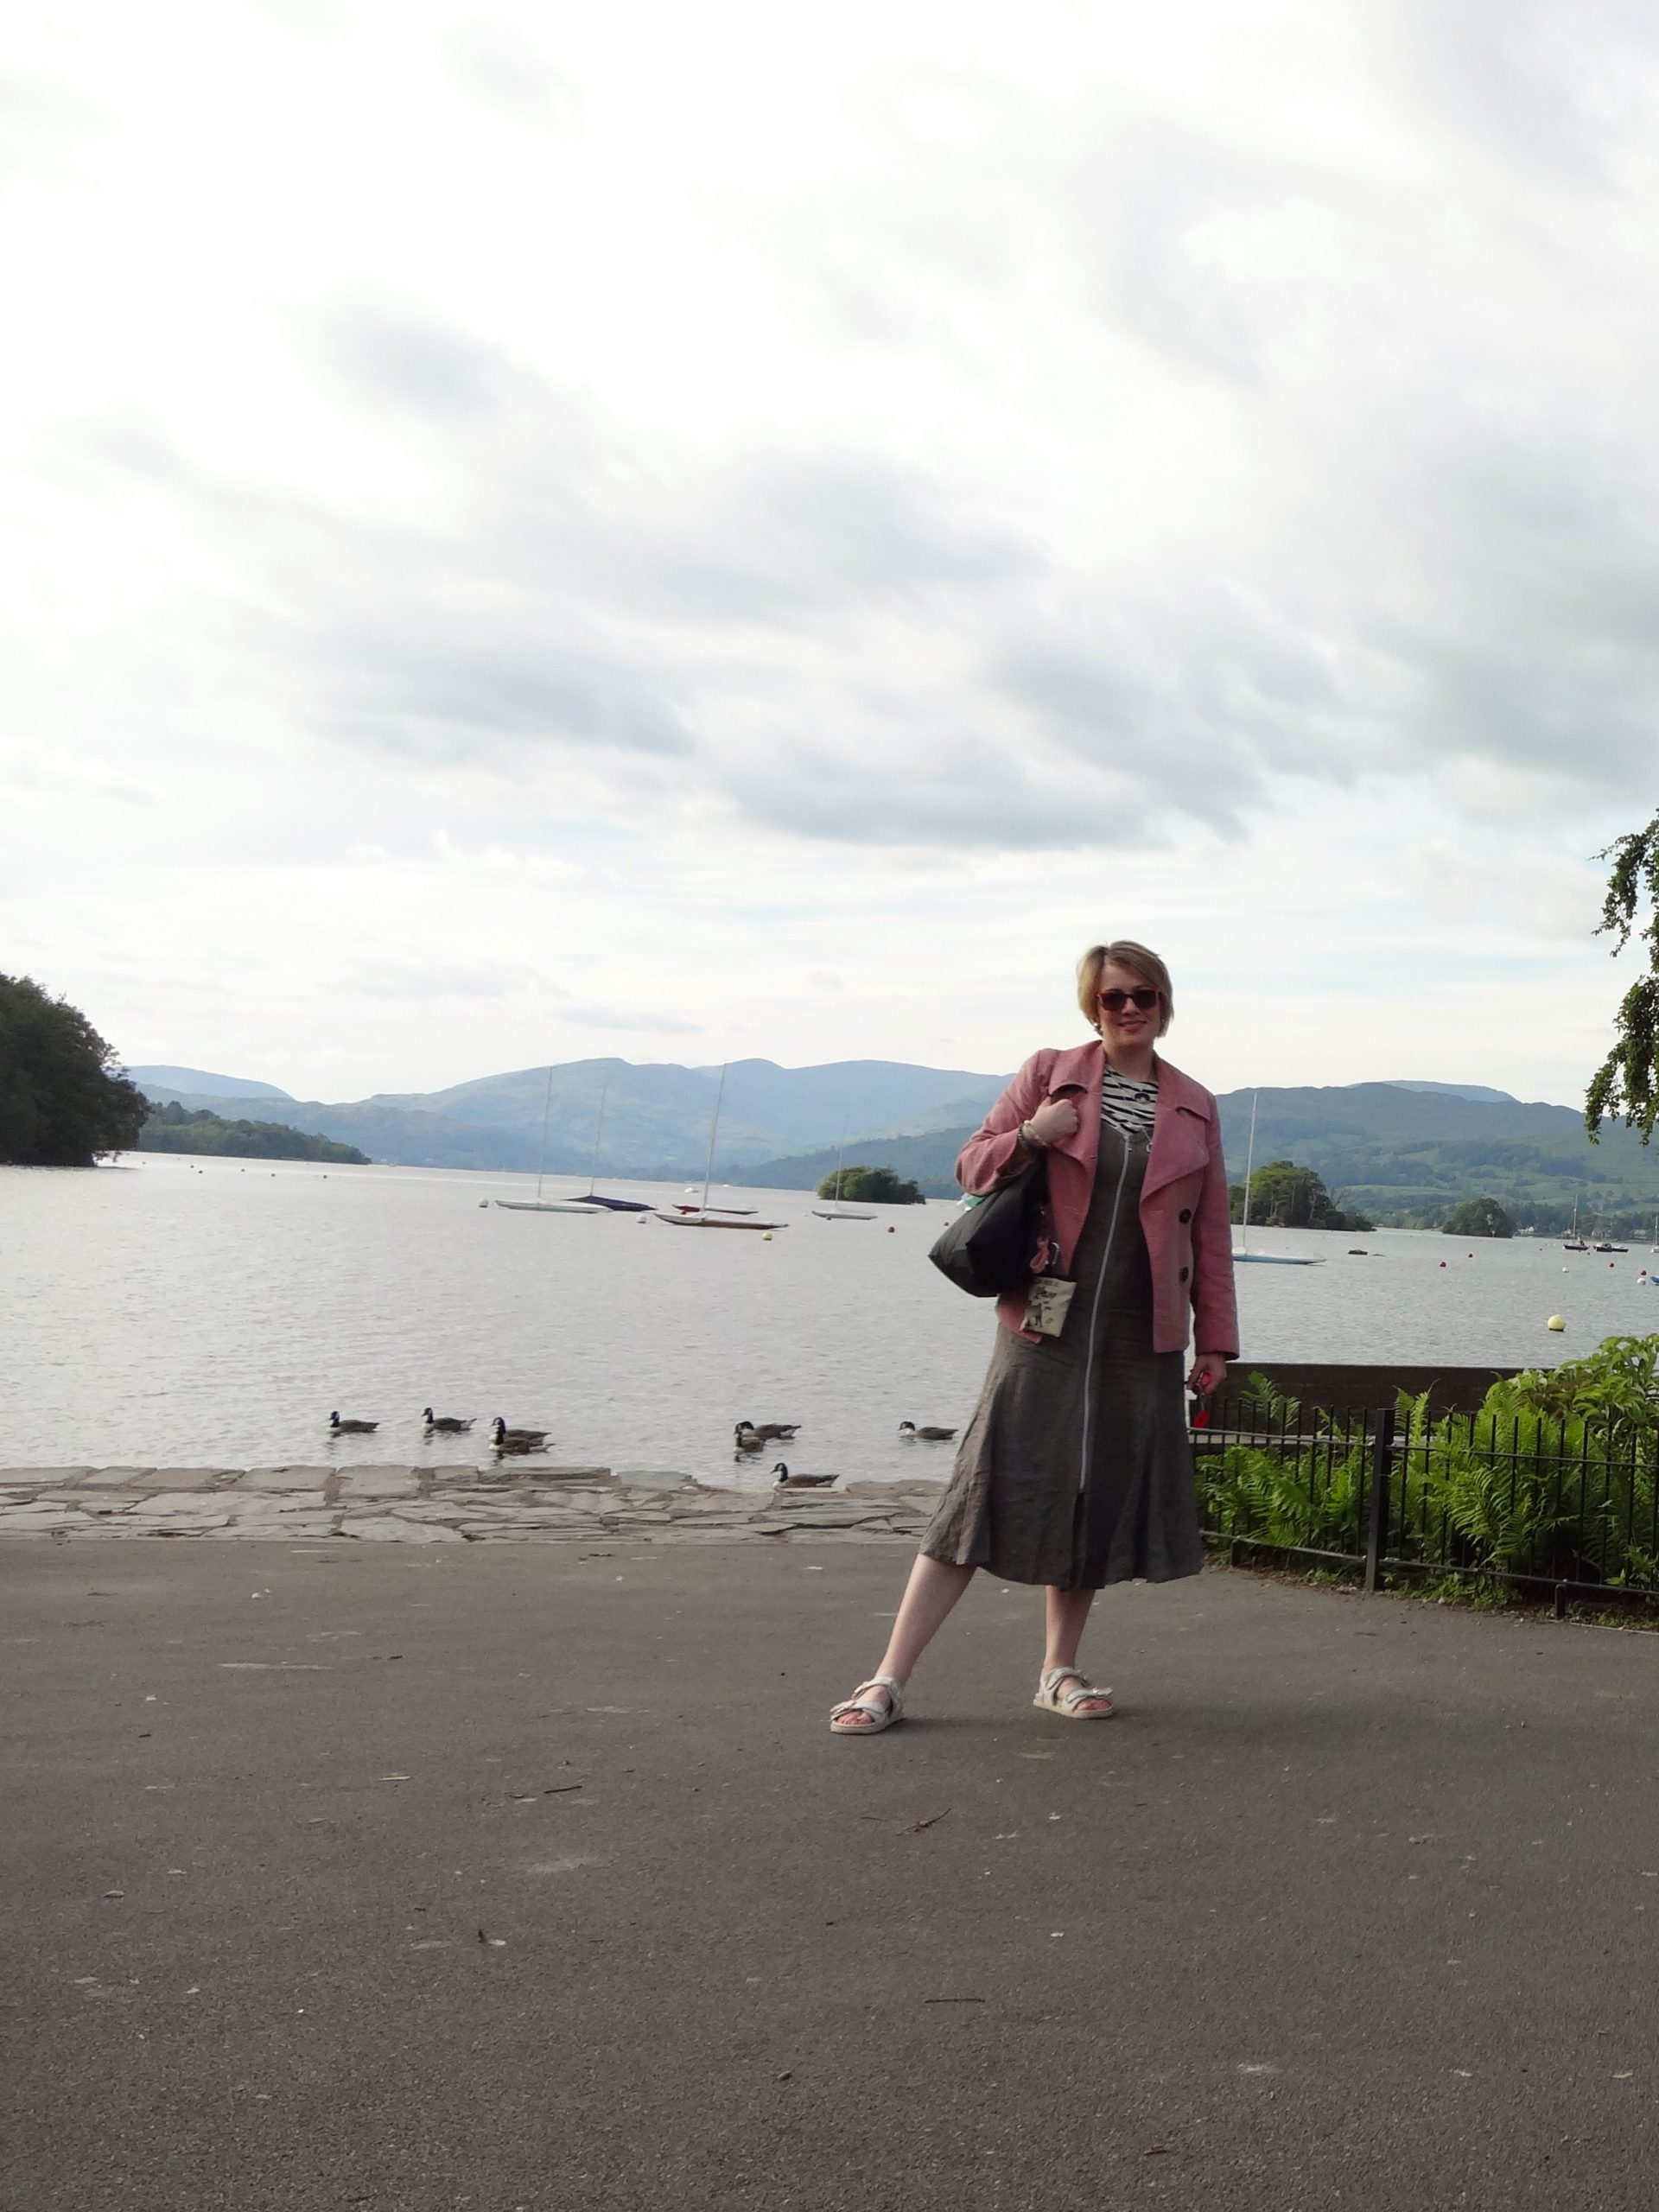 A Daytrip to Bowness On Windermere